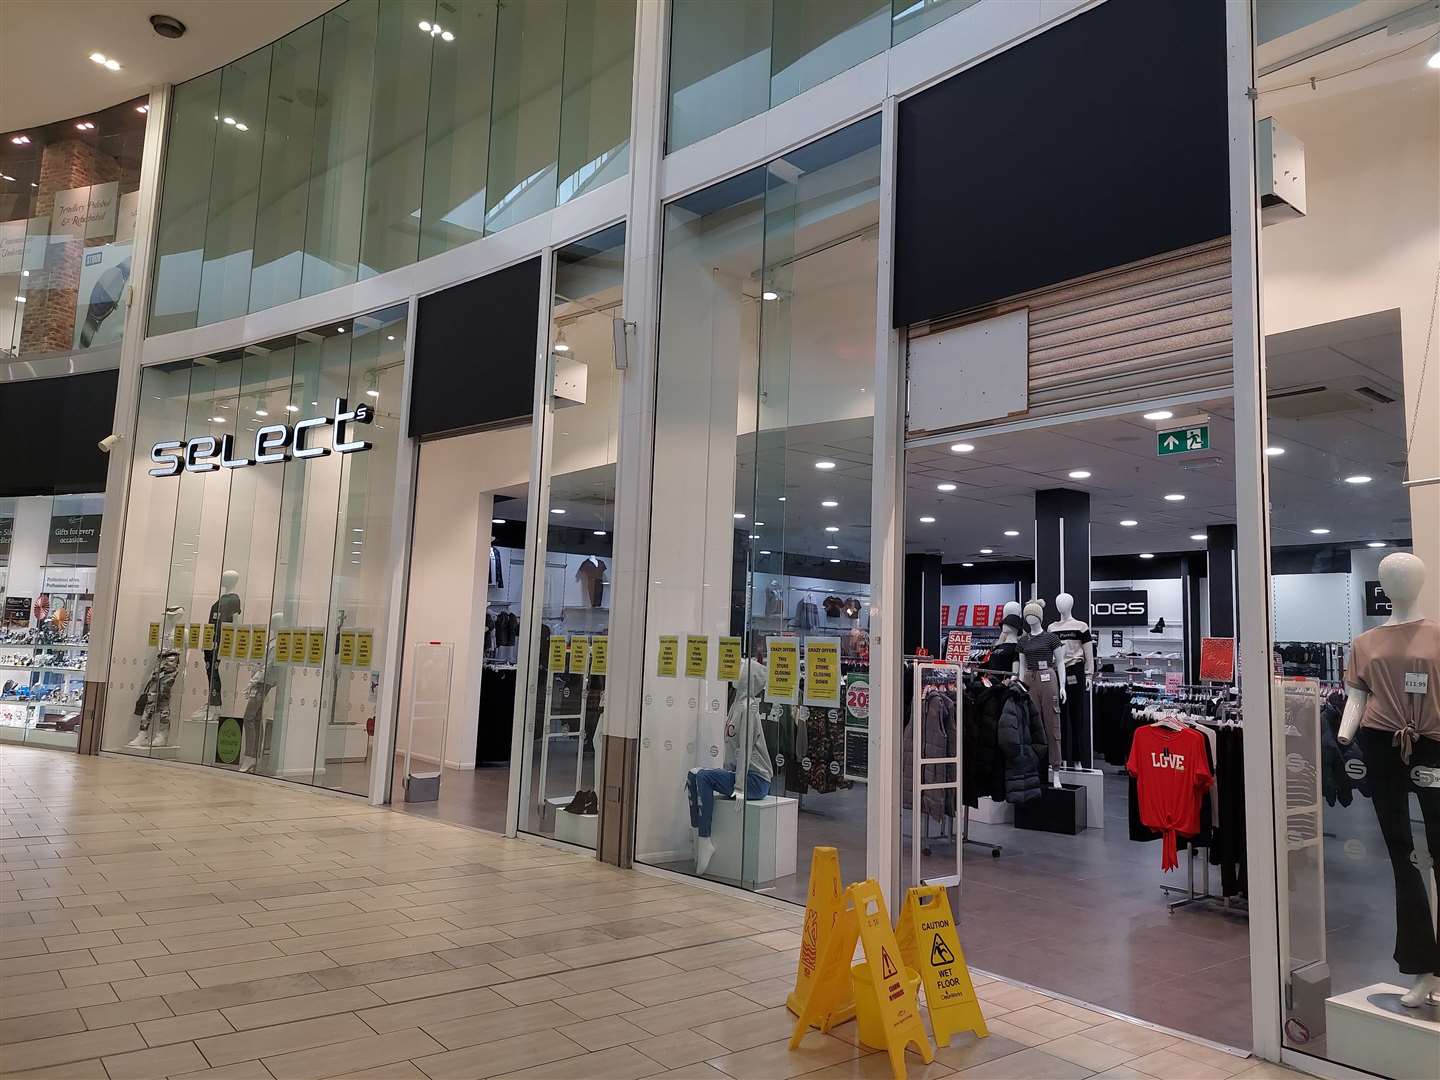 Select opened in County Square years ago and is located next to A Simmonds and the former Debenhams